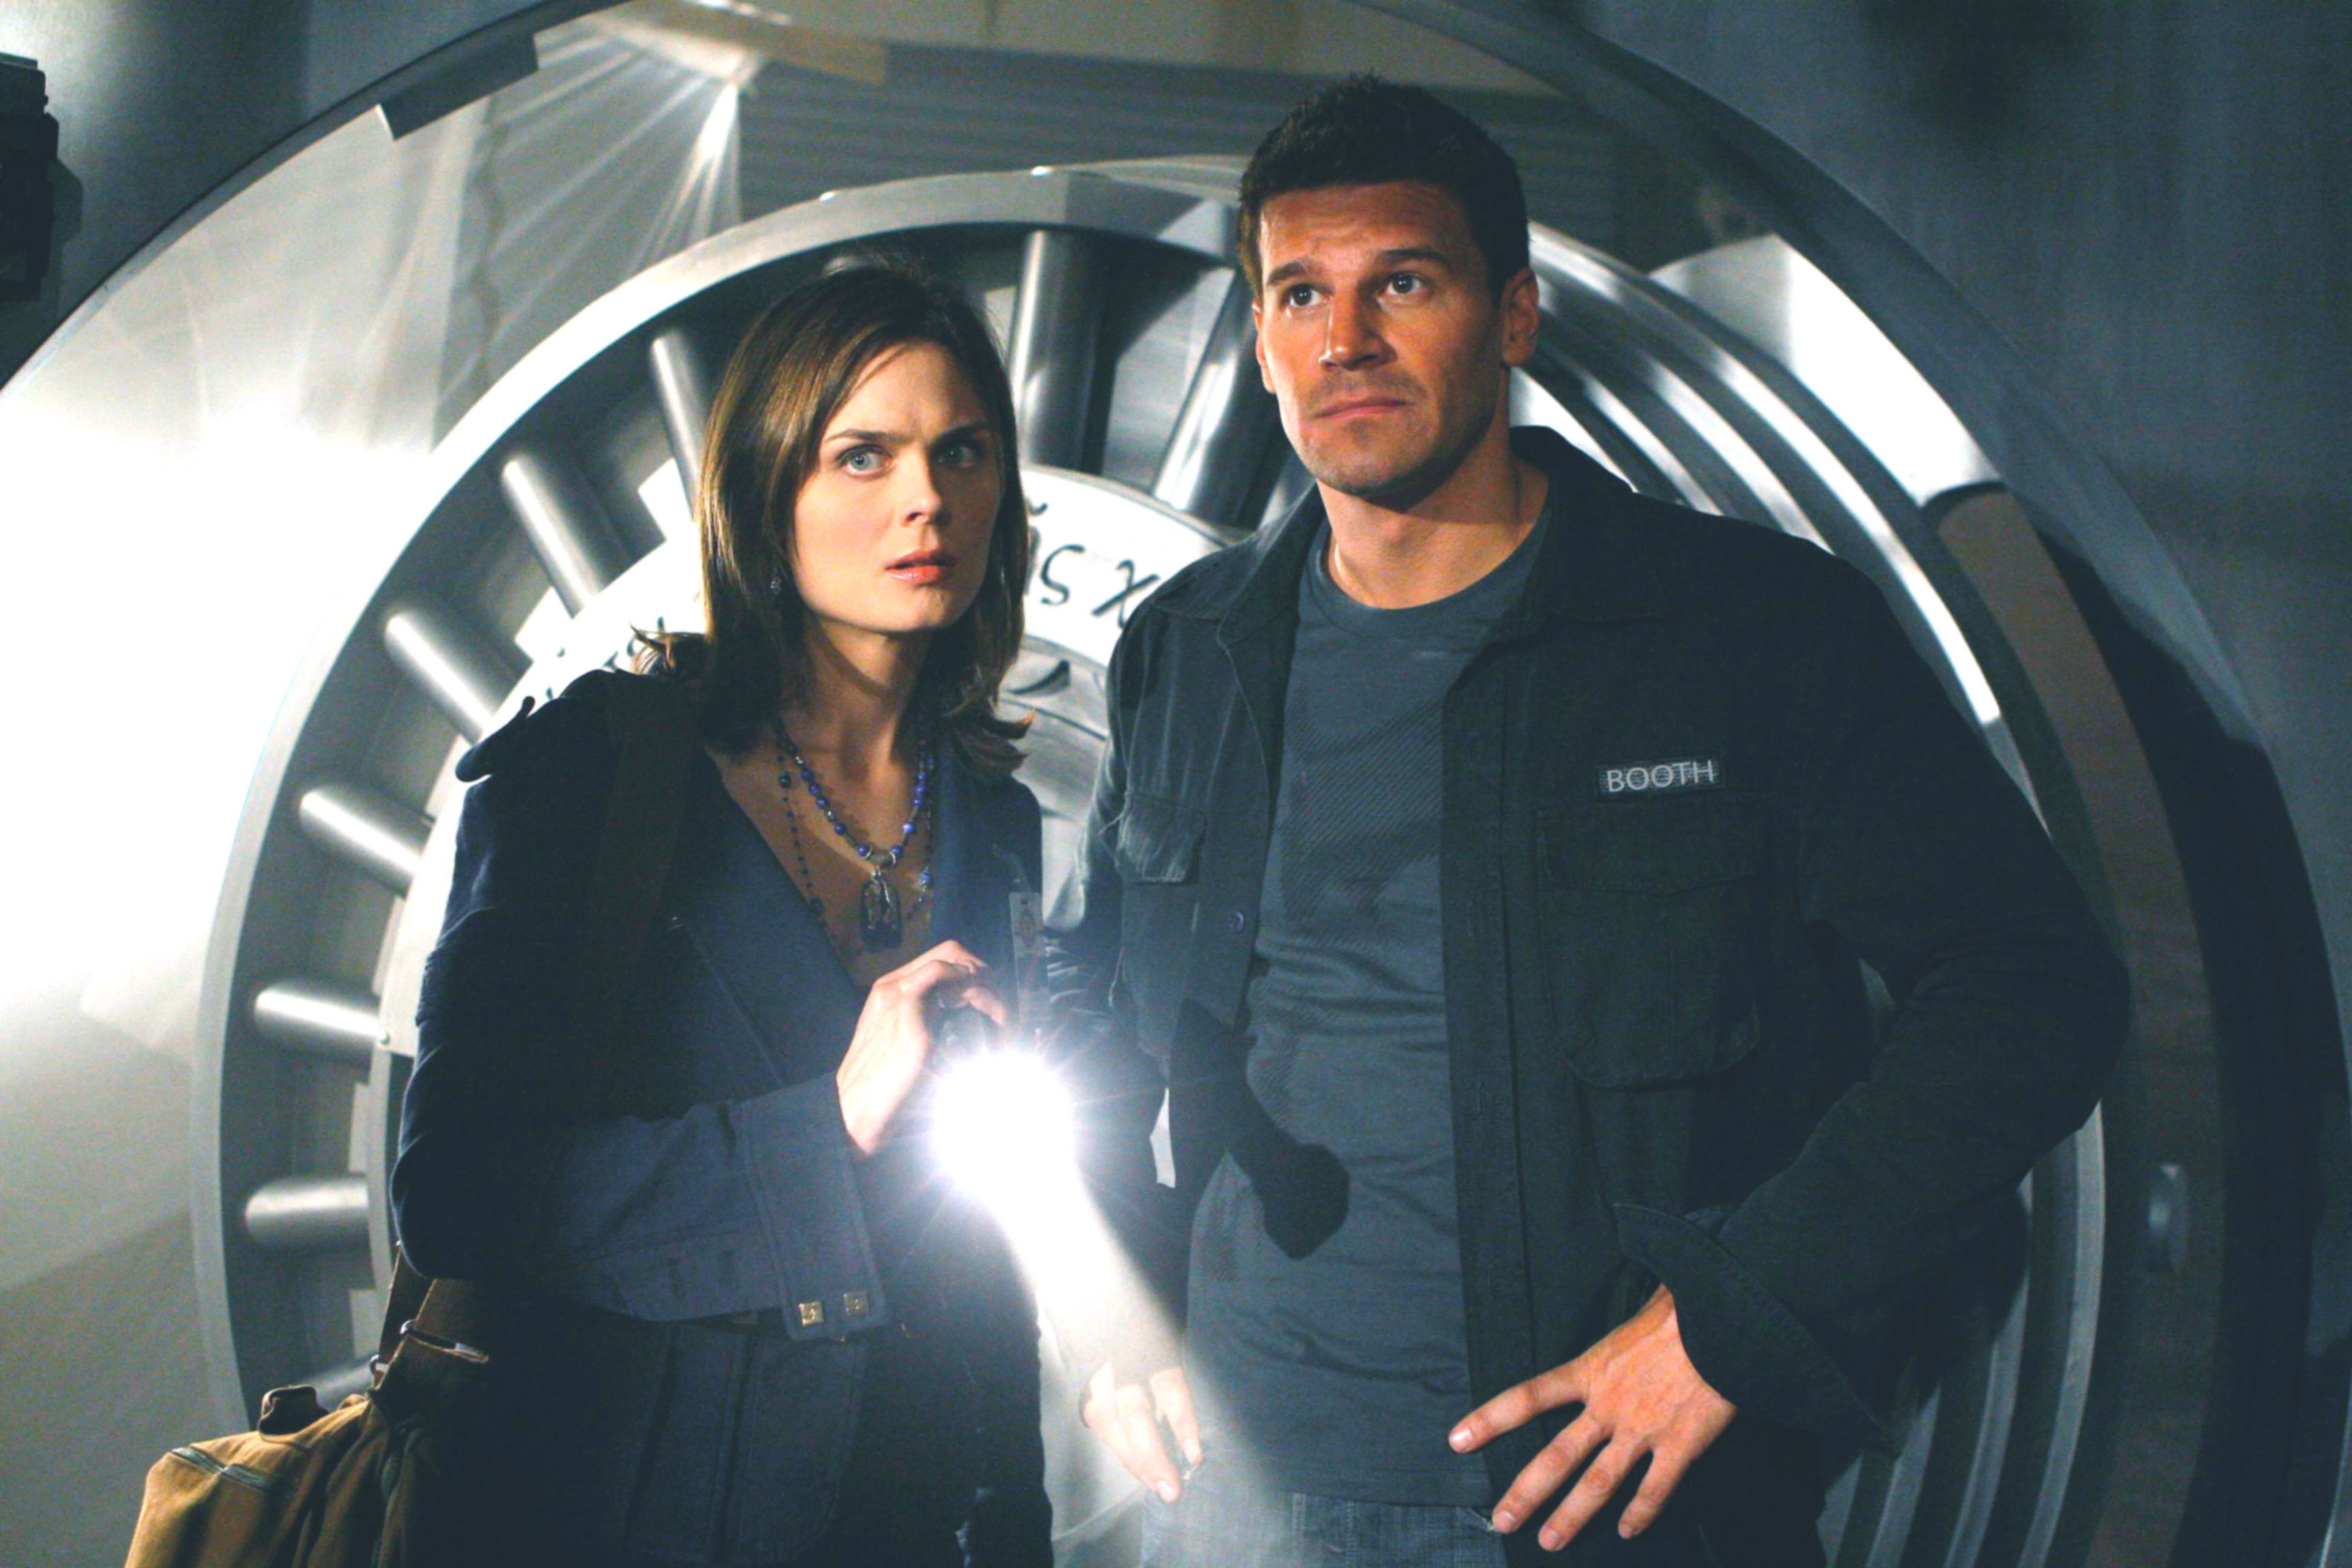 Emily Deschanel and David Boreanaz as Dr. Brennan and Seeley Booth on the set of Bones